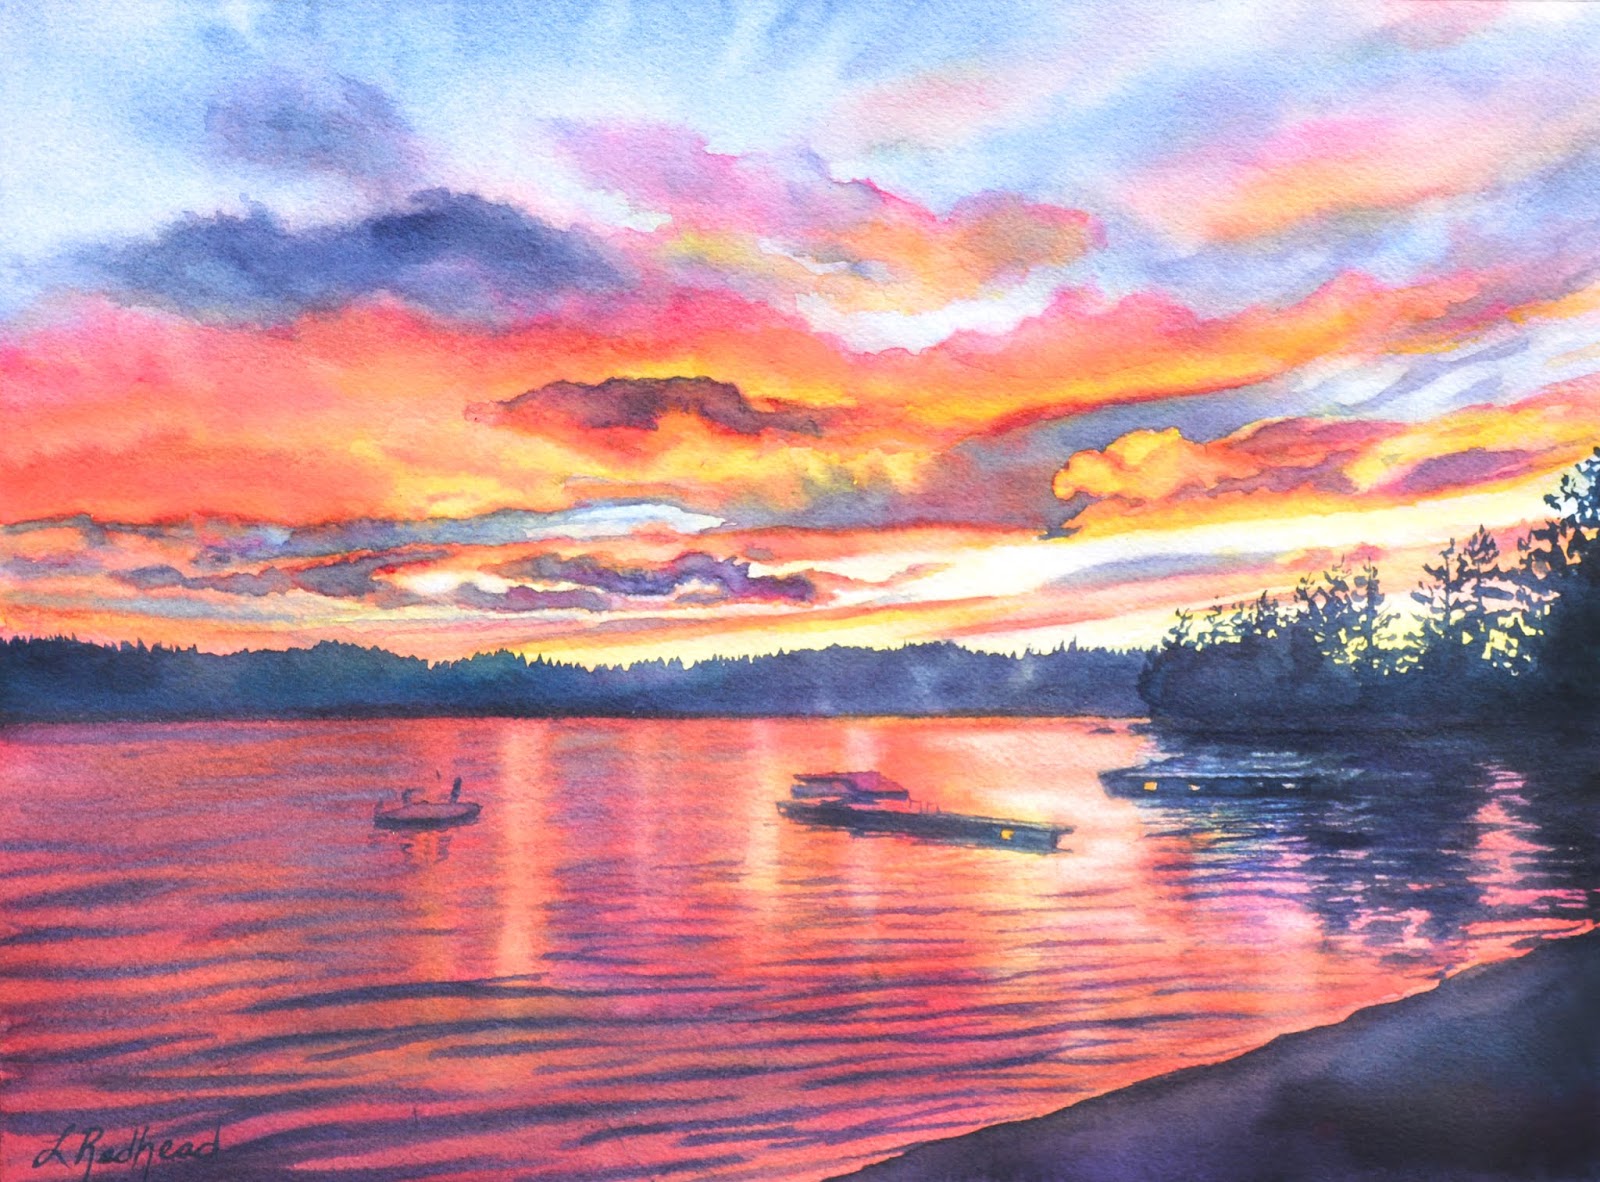 Sunset over water painting,beautiful sunset over the water painting -clea.....